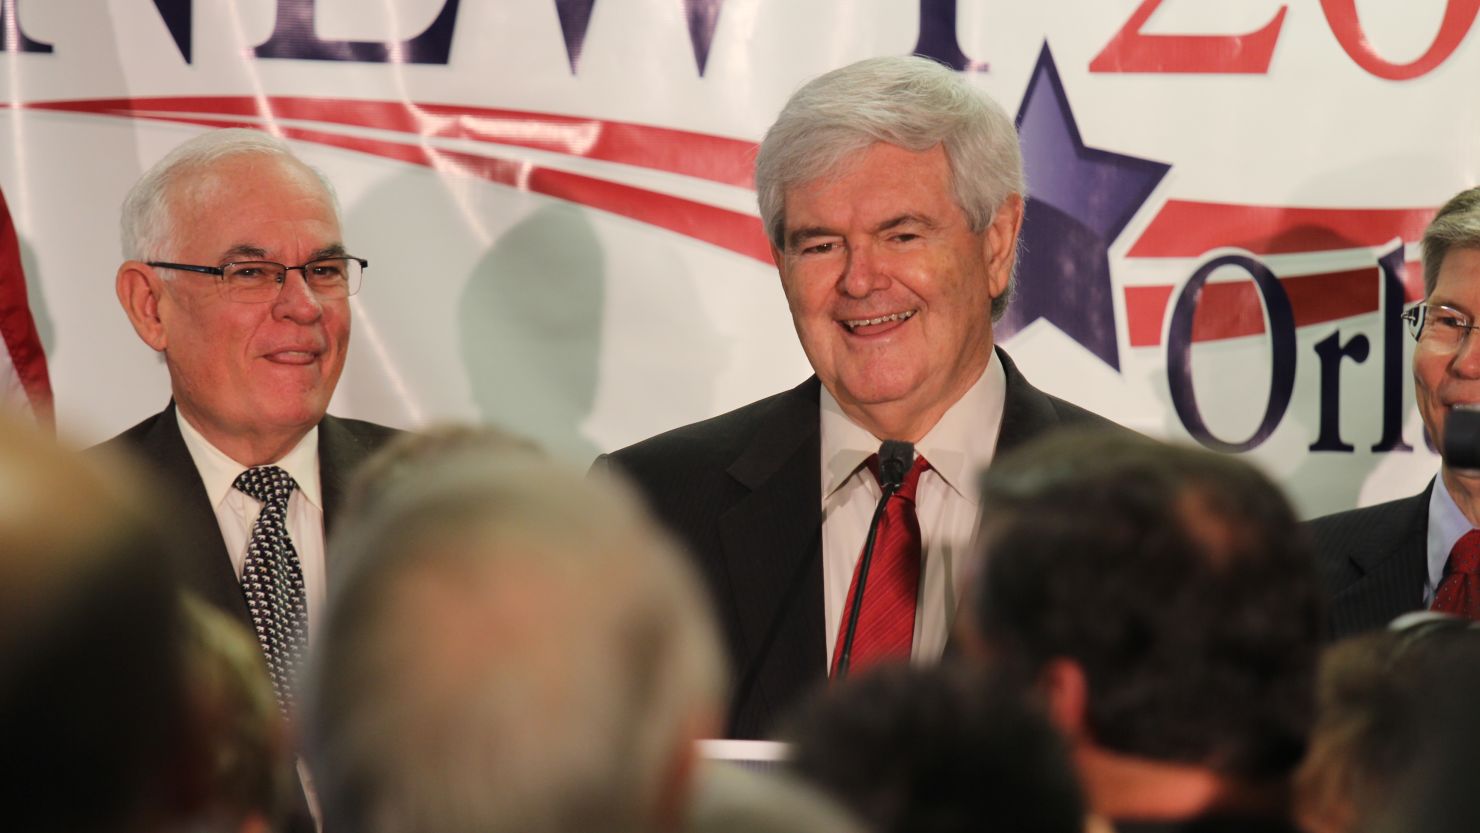 Newt Gingrich says Mitt Romney needs to show now how he will defend himself in a campaign against President Obama.